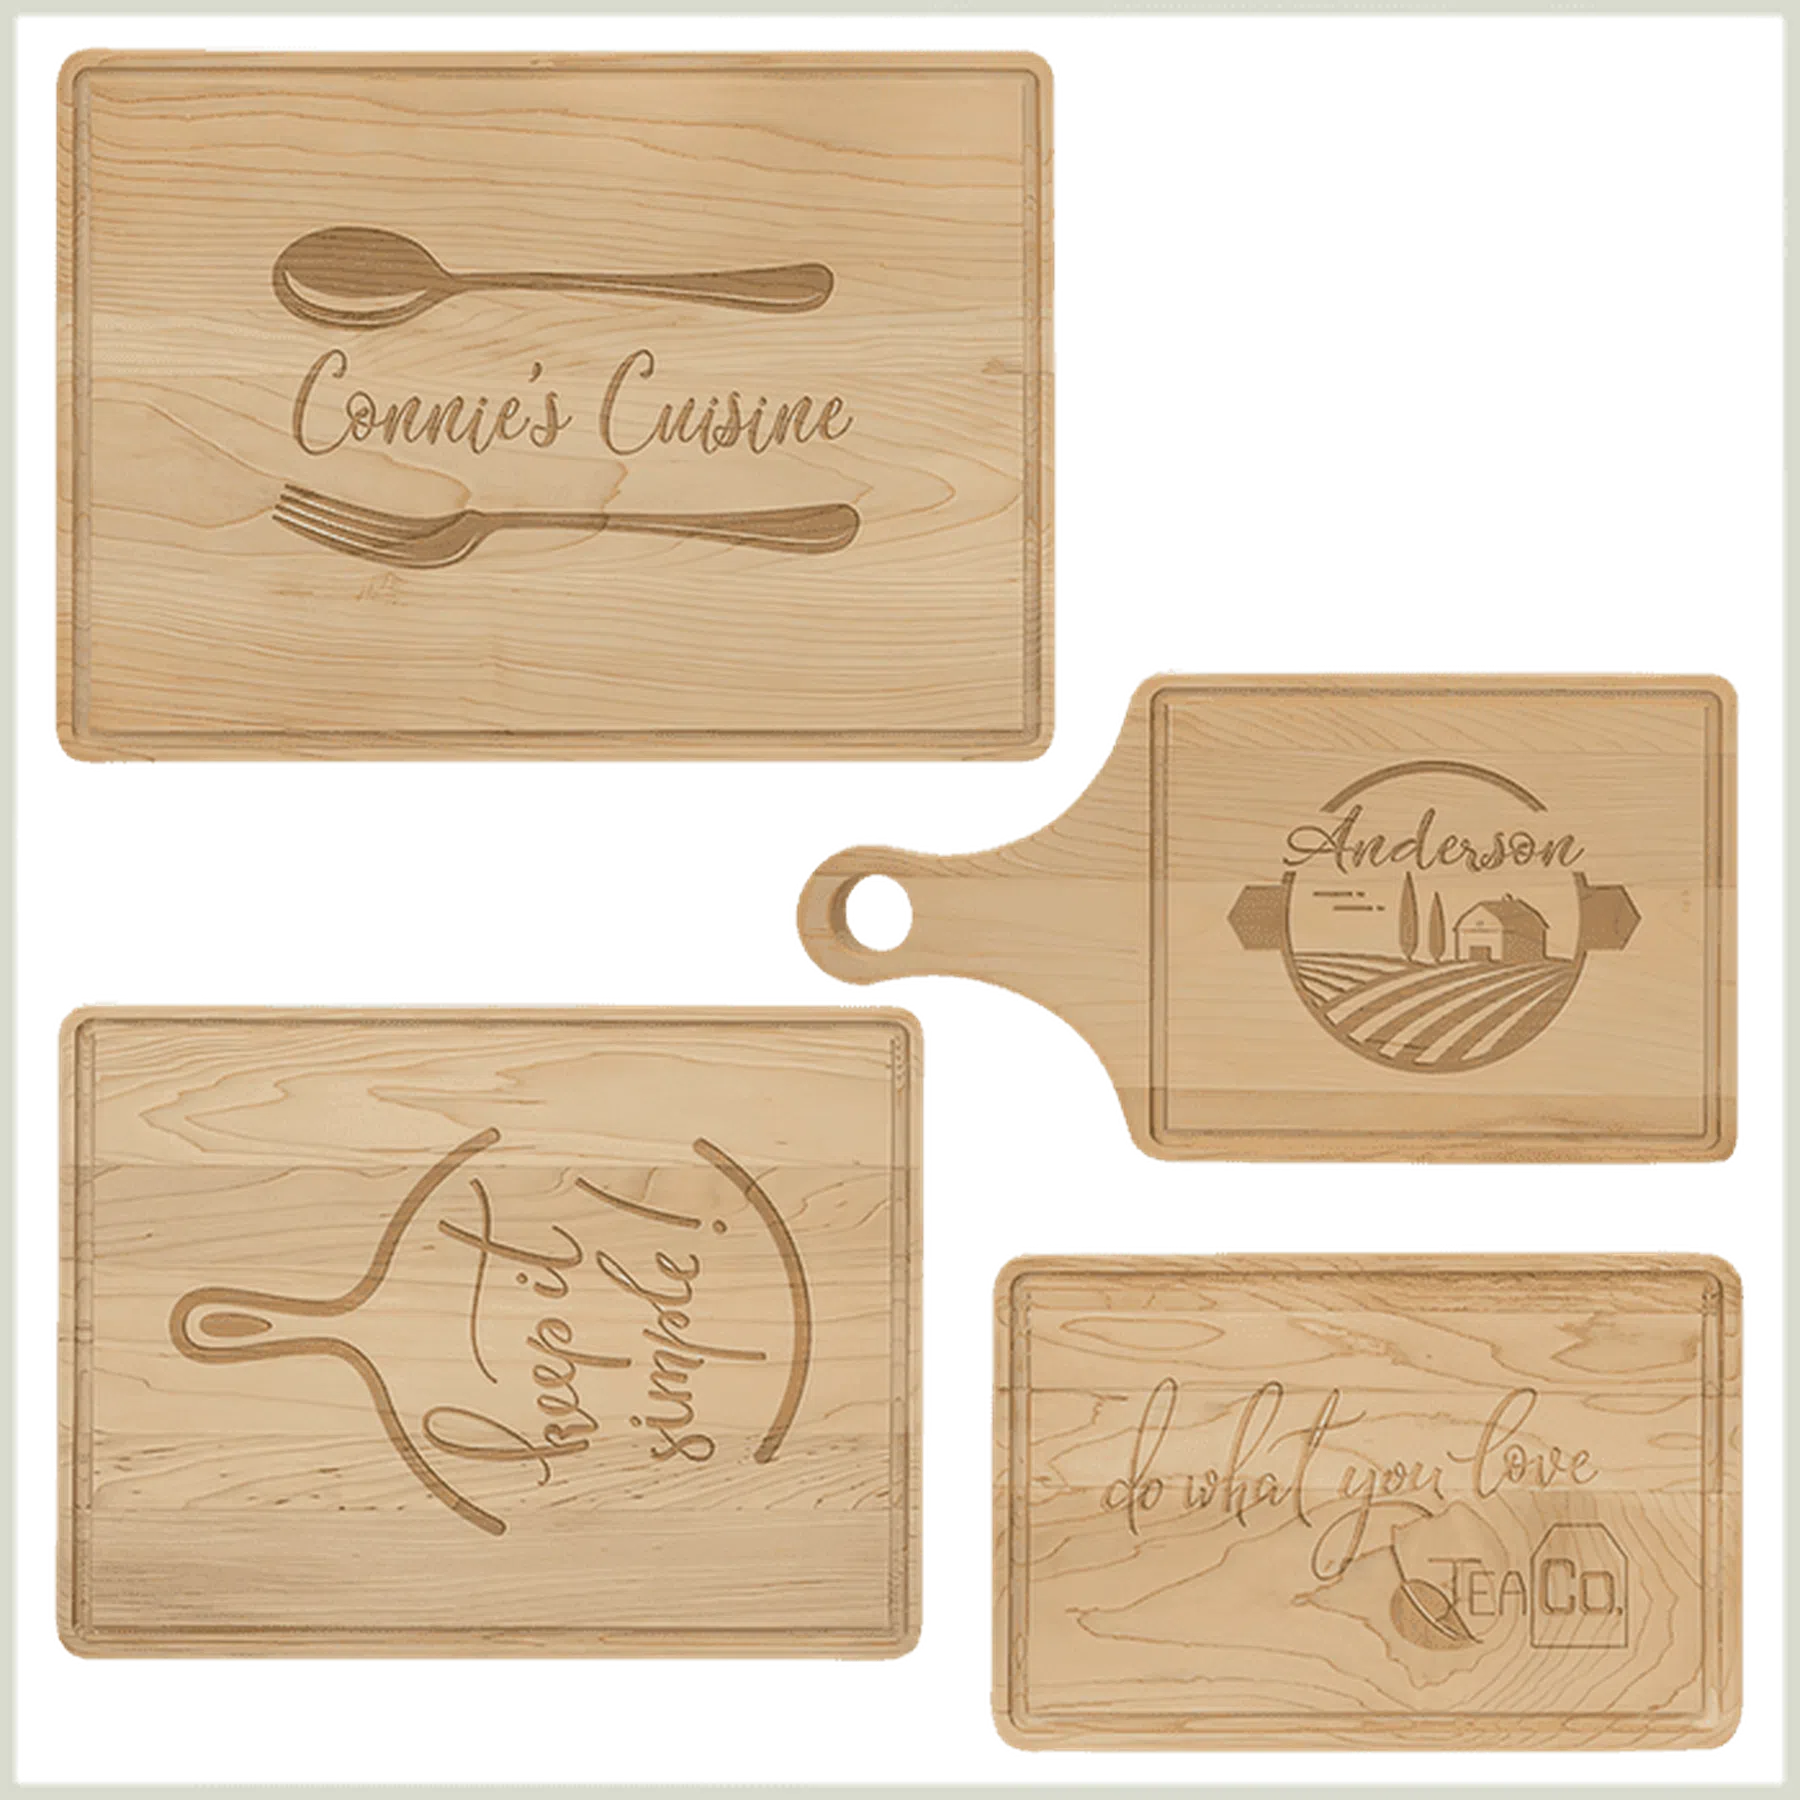 Maple Cutting Board with Drip Ring (Various Sizes)